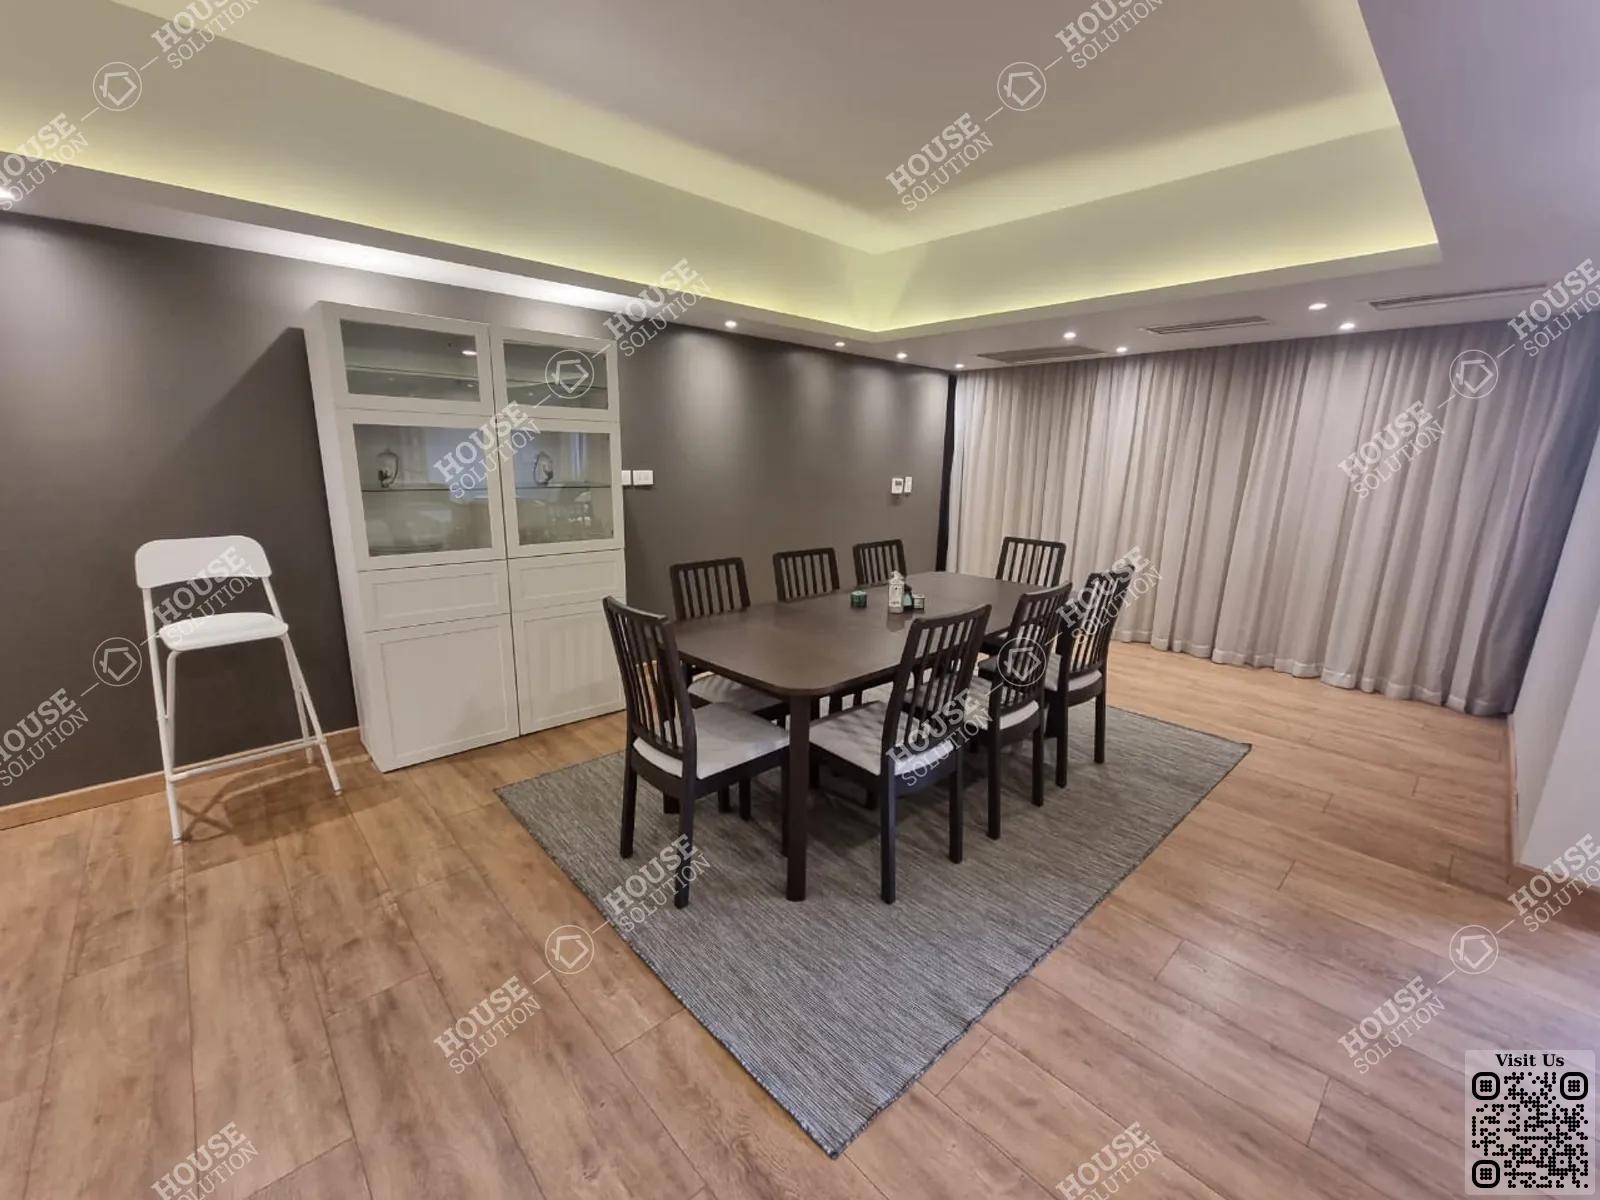 DINING AREA @ Apartments For Rent In Maadi Maadi Degla Area: 220 m² consists of 3 Bedrooms 3 Bathrooms Modern furnished 5 stars #5351-2